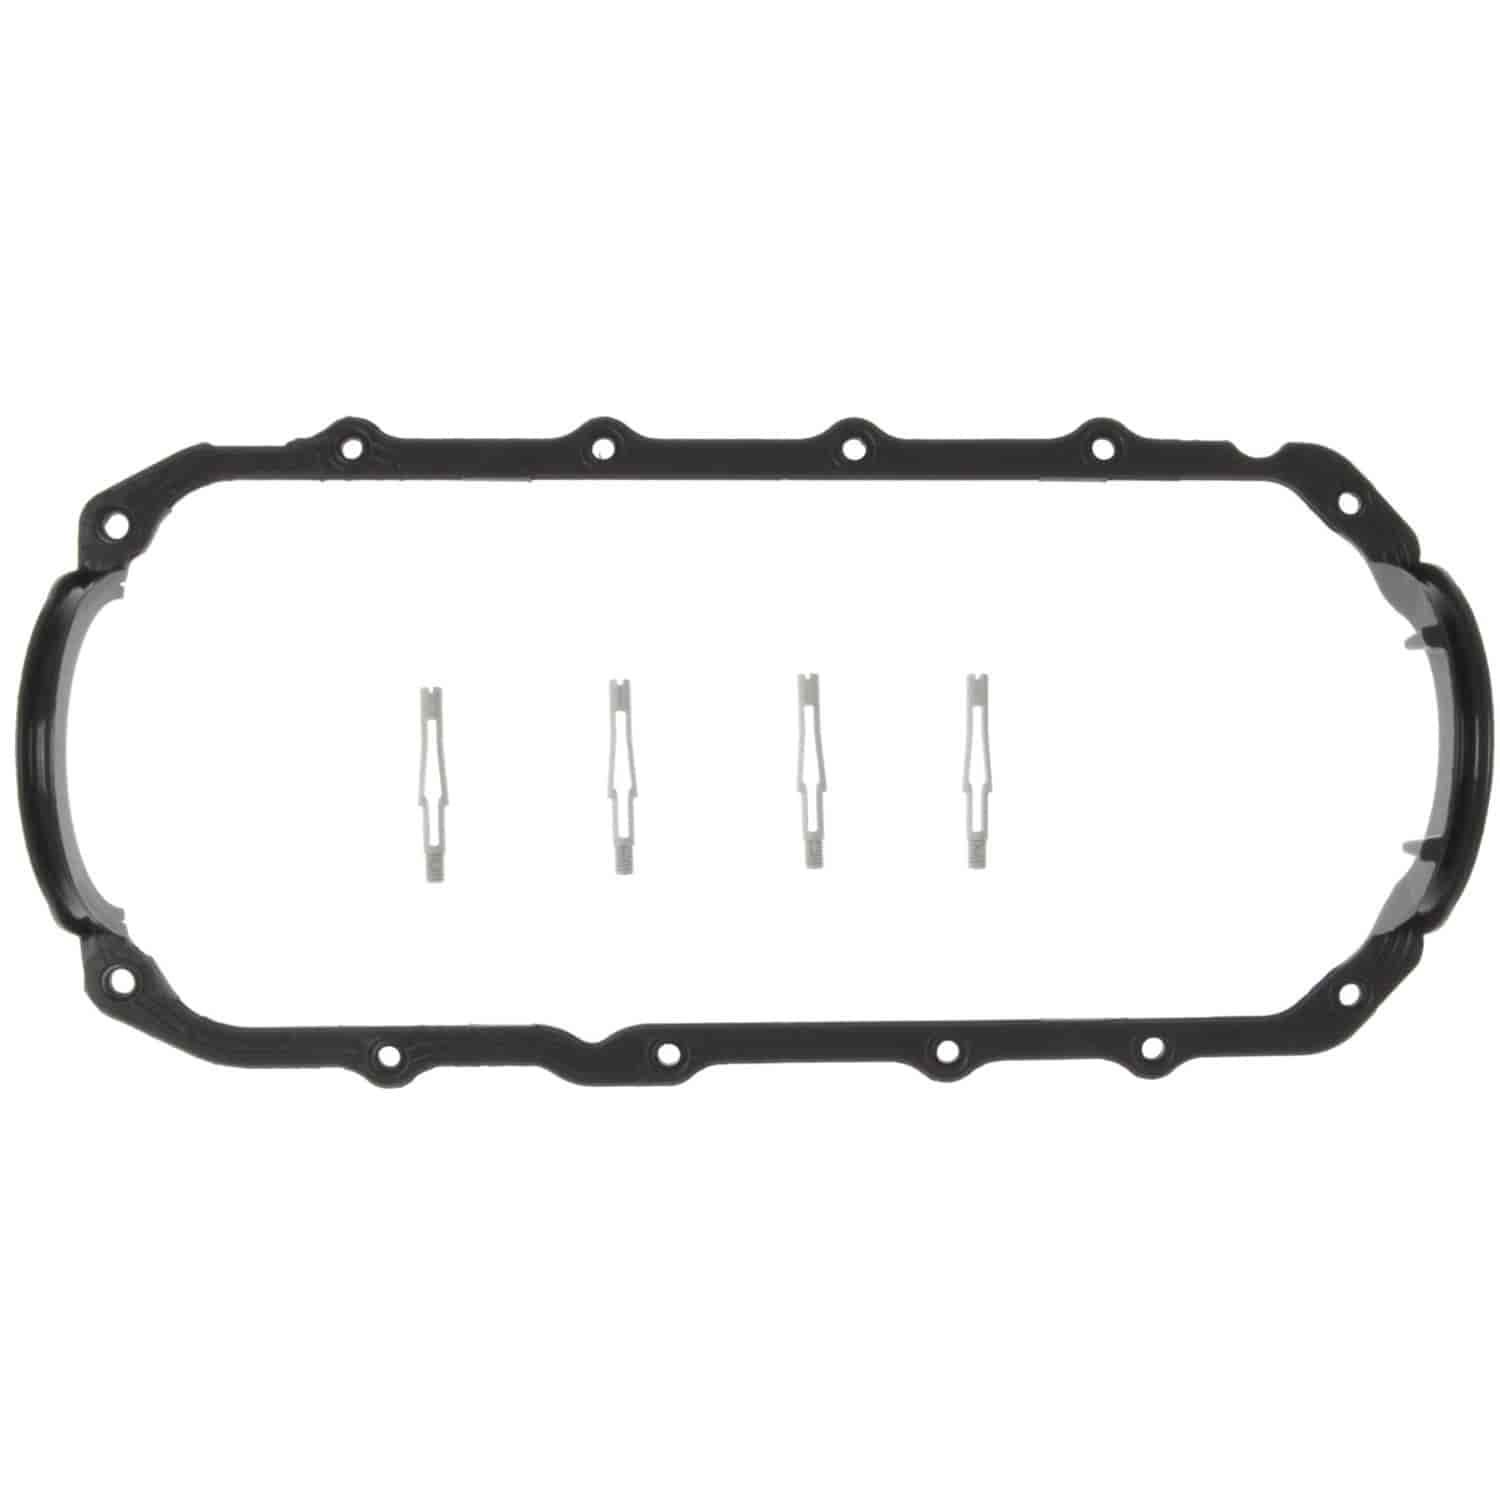 Oil Pan Gasket Set 1987-1997 Chevy 60 Degree V6 2.8/3.1/3.4L in Molded Rubber